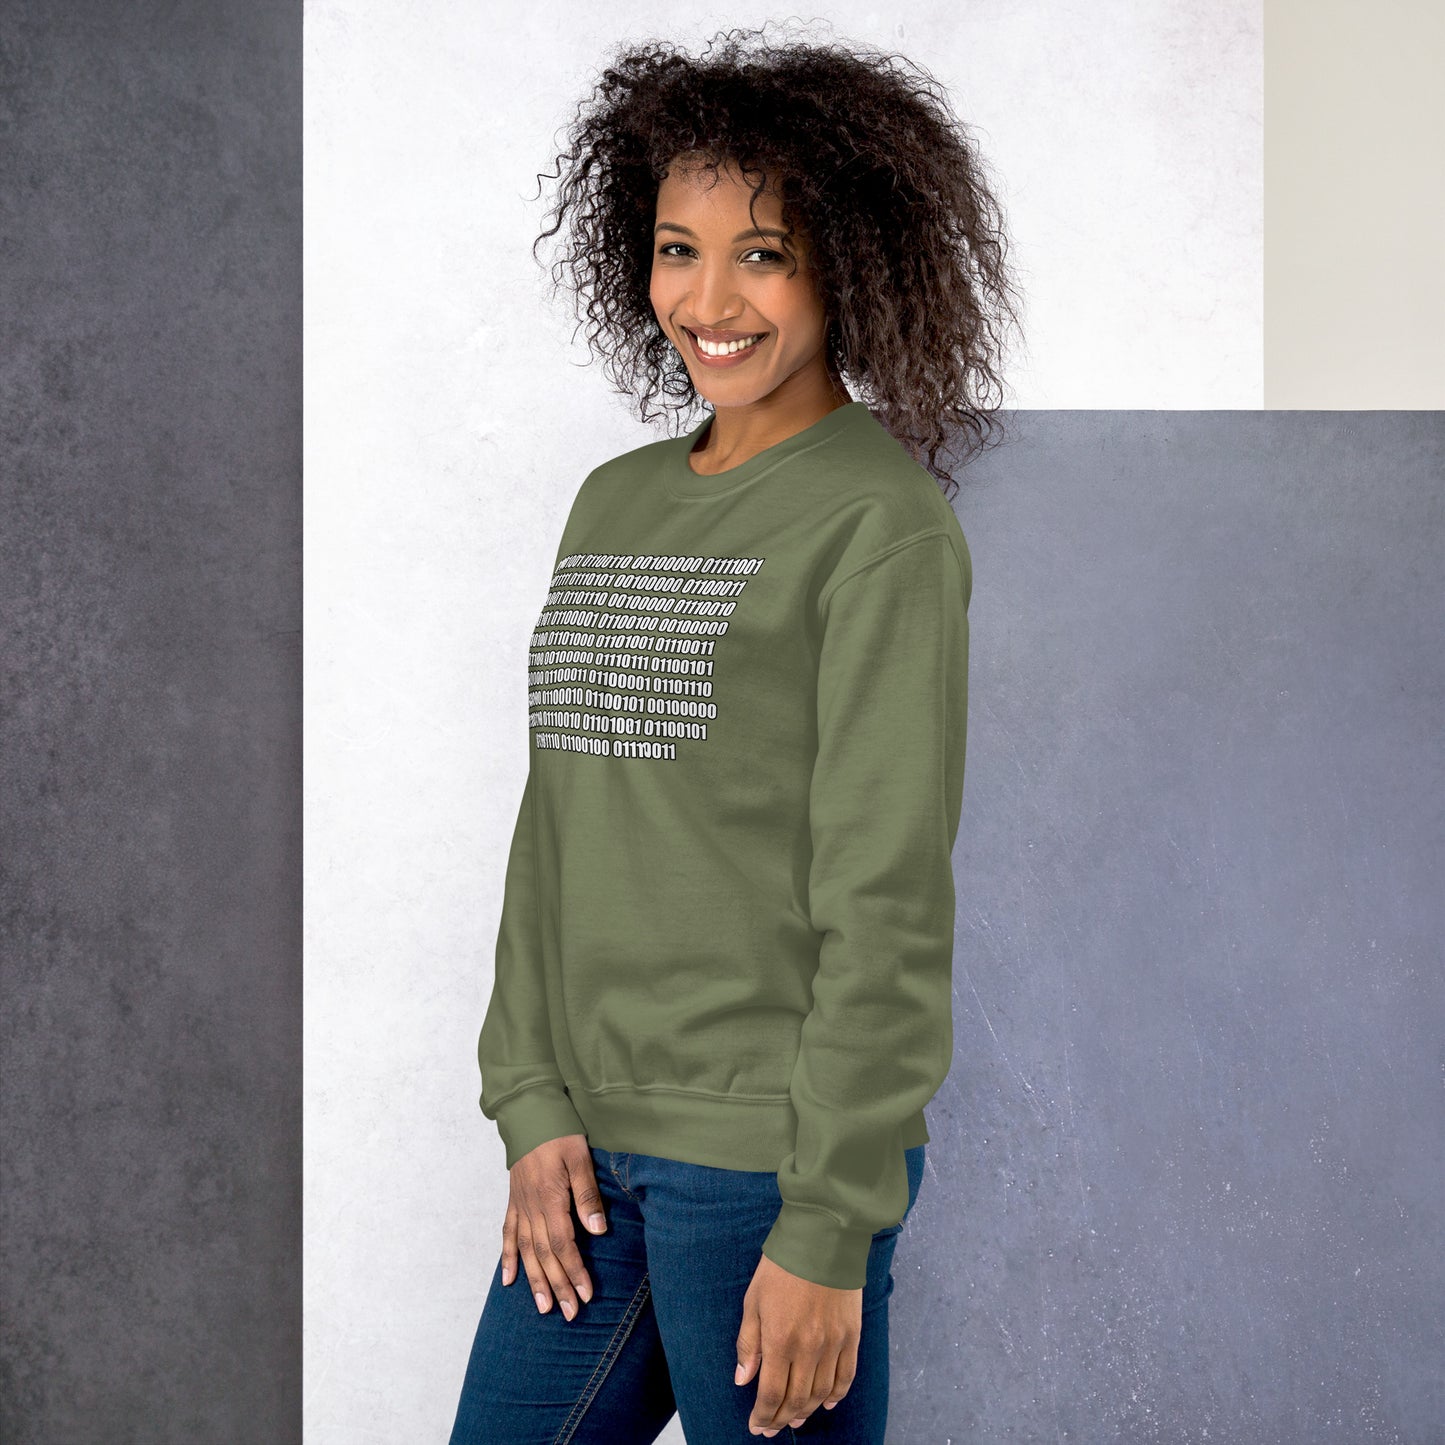 Women with military green sweatshirt with binaire text "If you can read this"